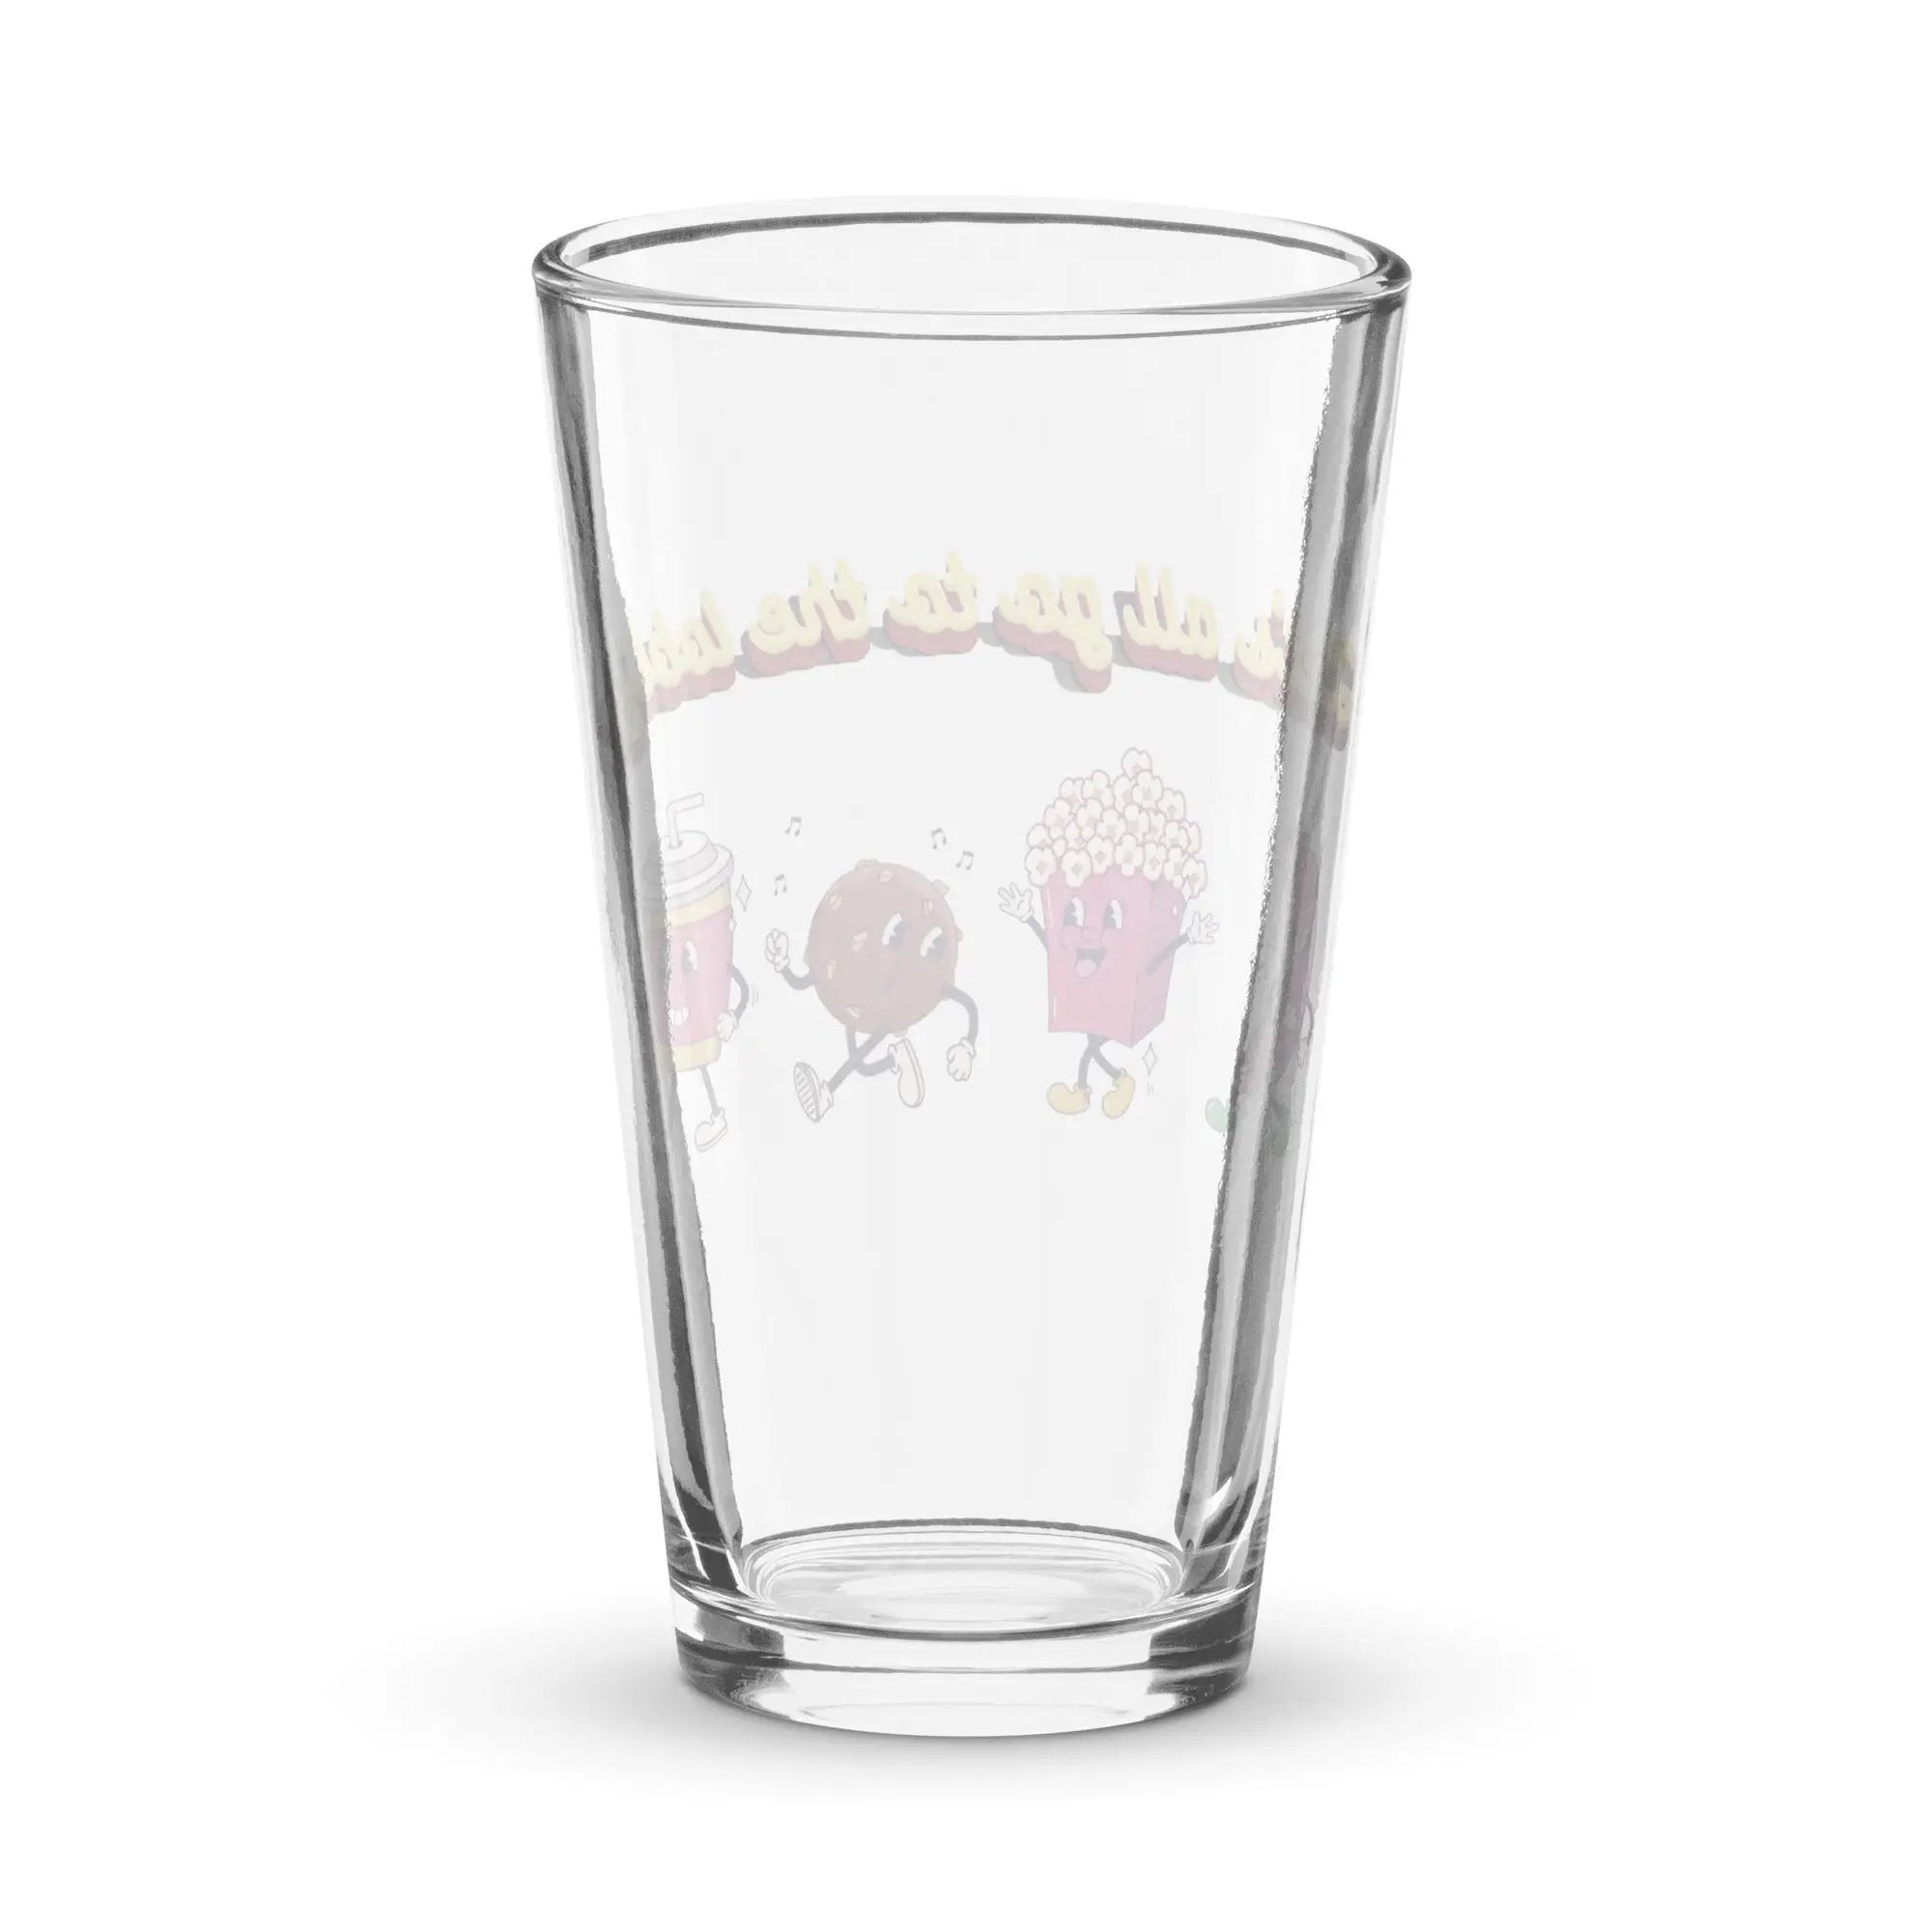 Let's All Go To The Lobby Shaker pint glass